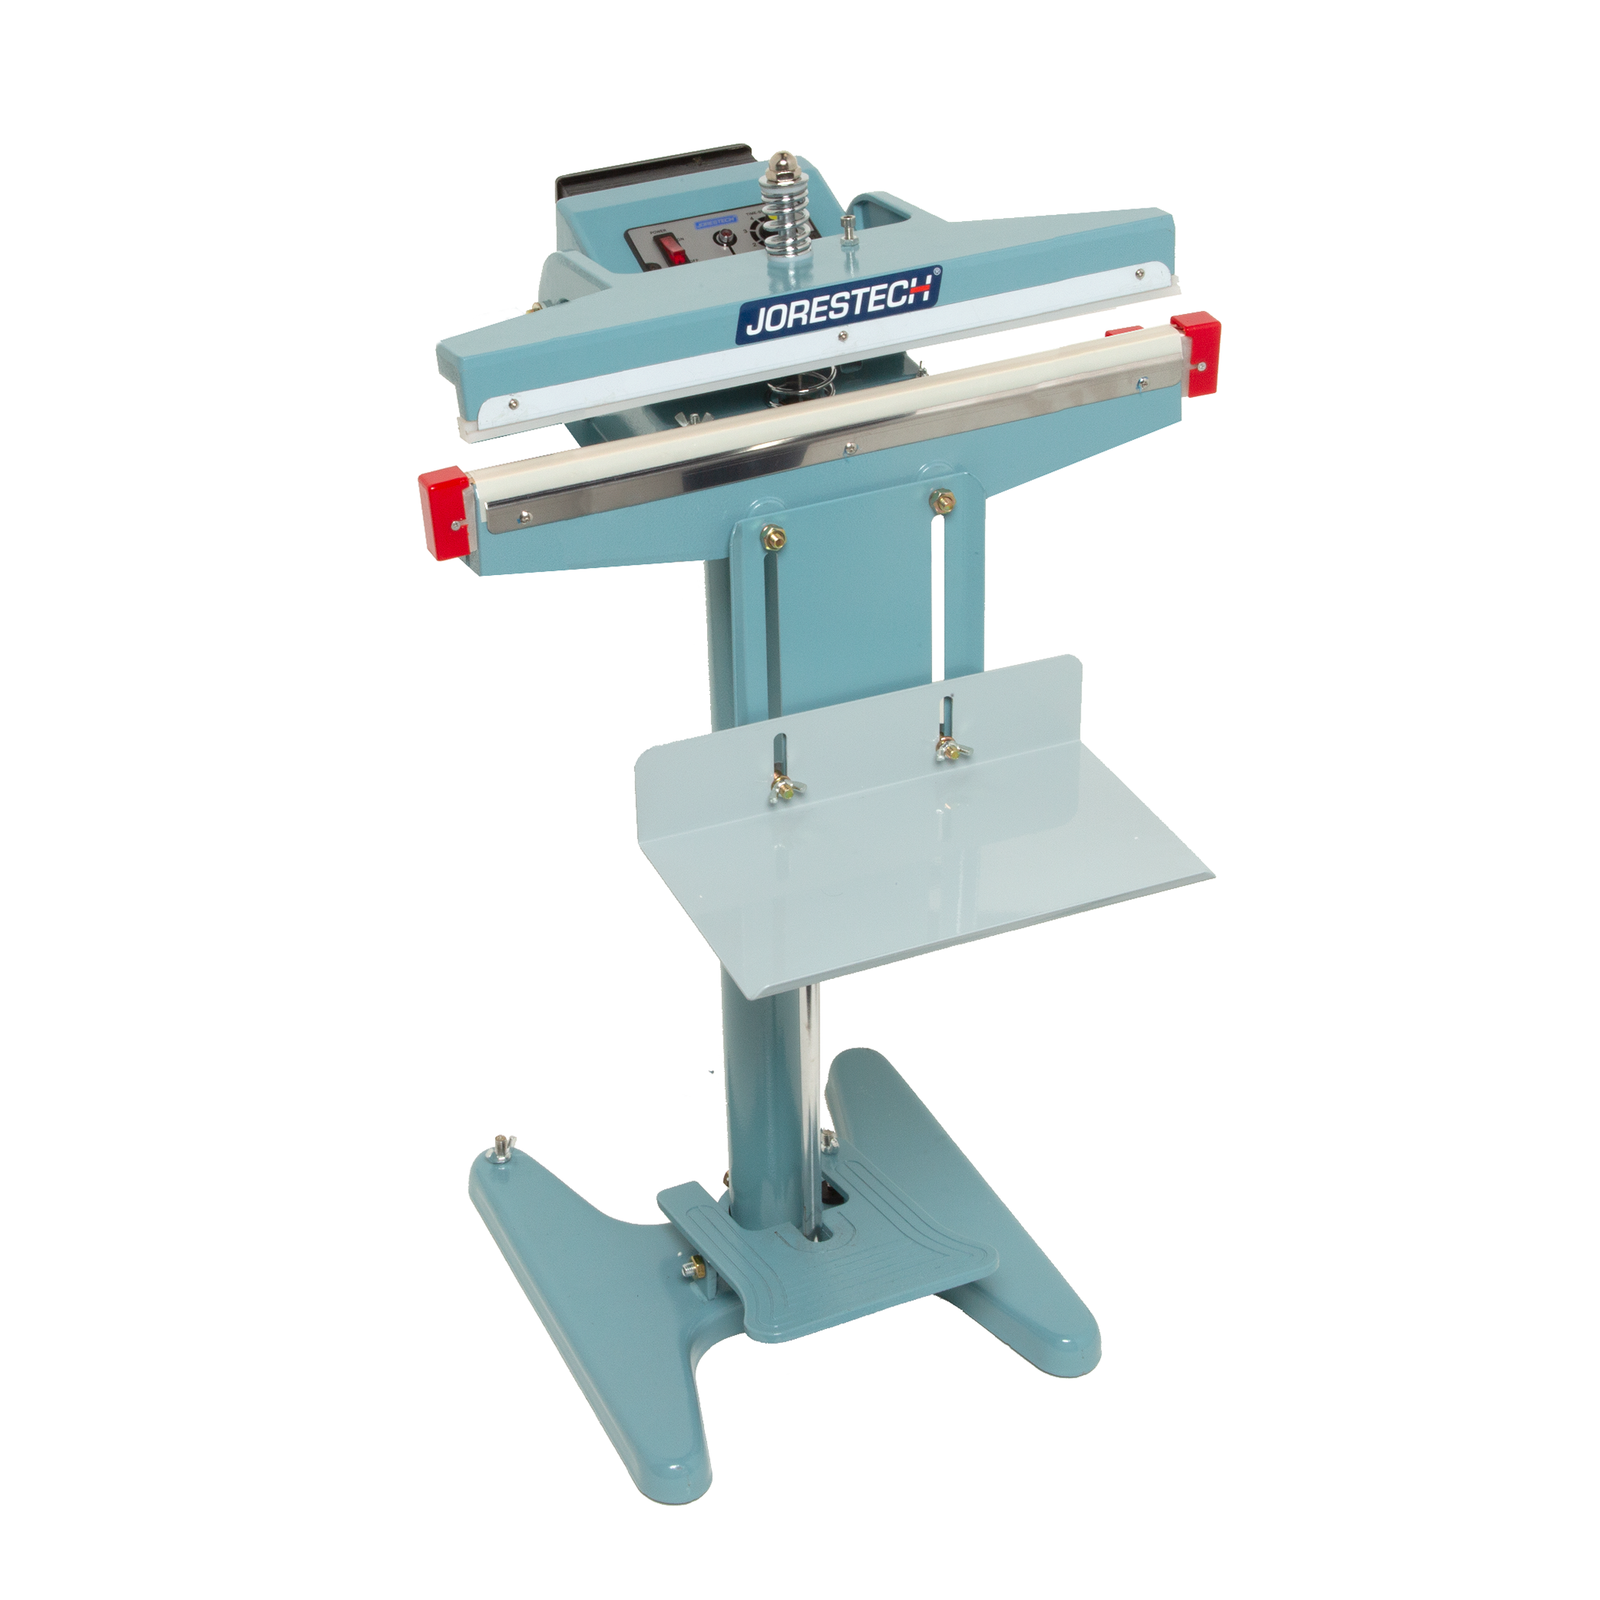 Blue foot impulse sealer over white background. Machine is shown with open sealing jaw and JORES TECHNOLOGIES® logo.